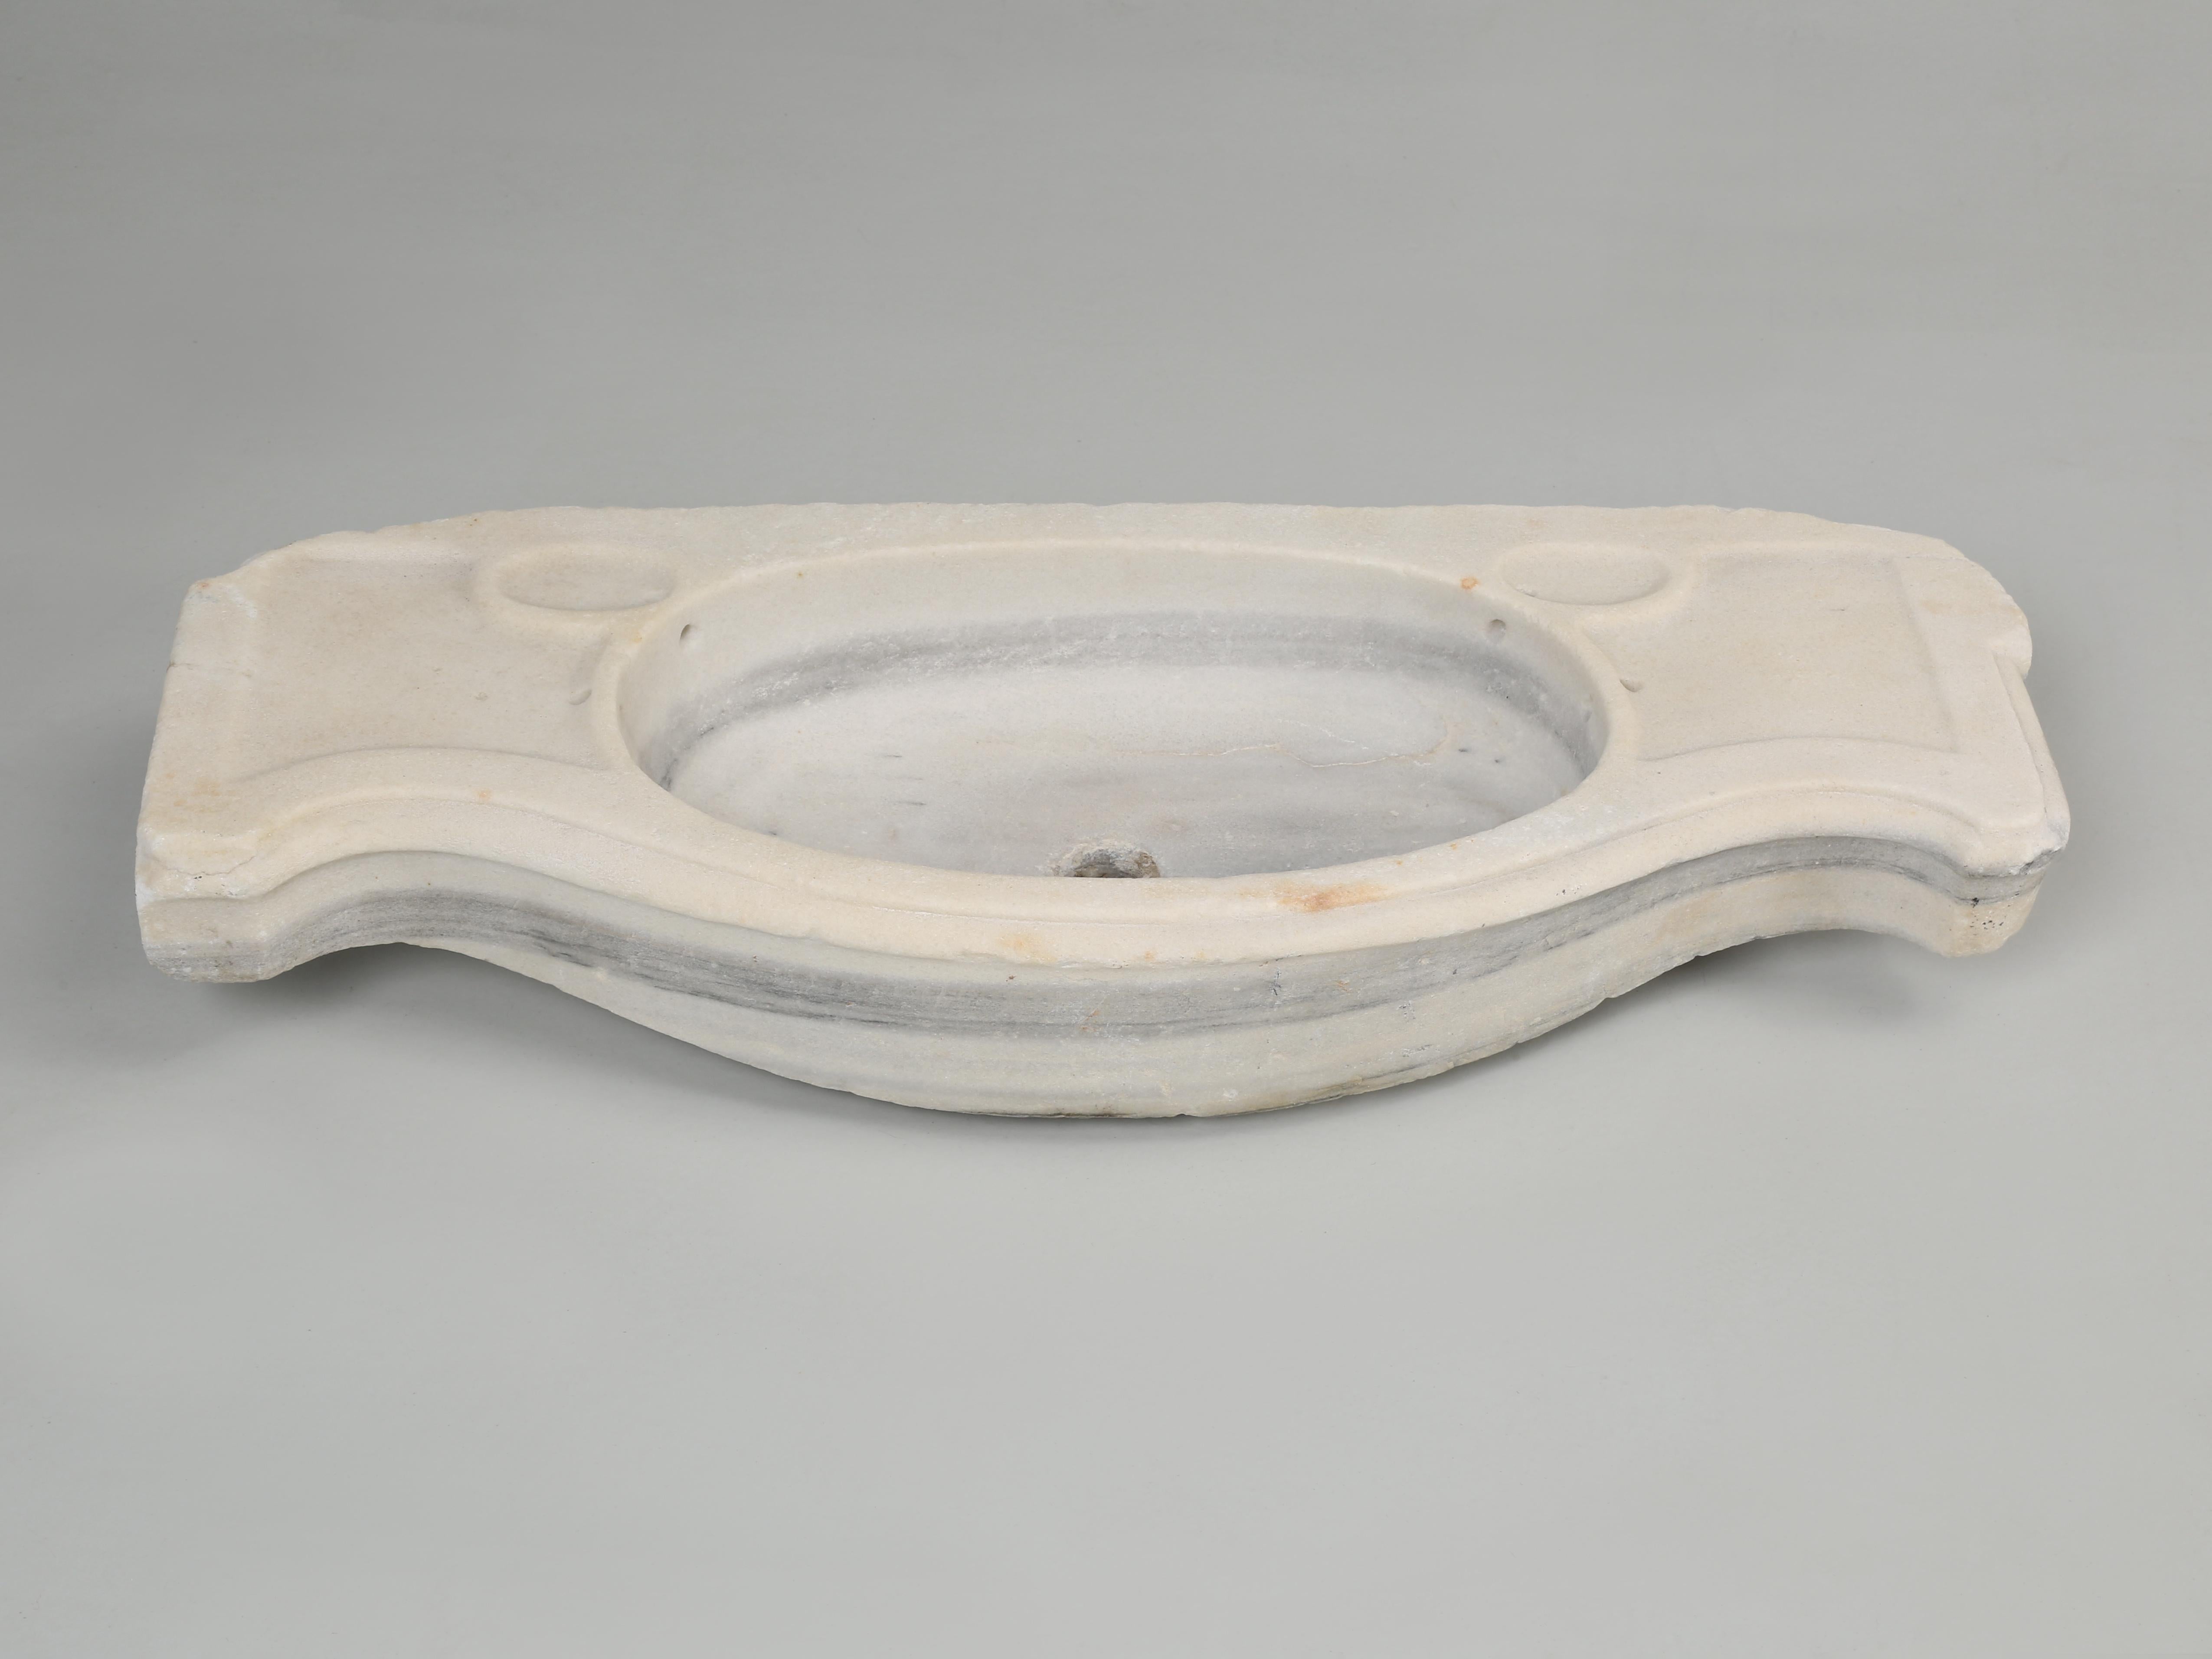 Antique marble sink imported from France, but could have been made in Italy. The sink is in nice original condition, considering that it's probably around 150-years old. When dealing with antique stone items, it's nearly impossible to pinpoint an